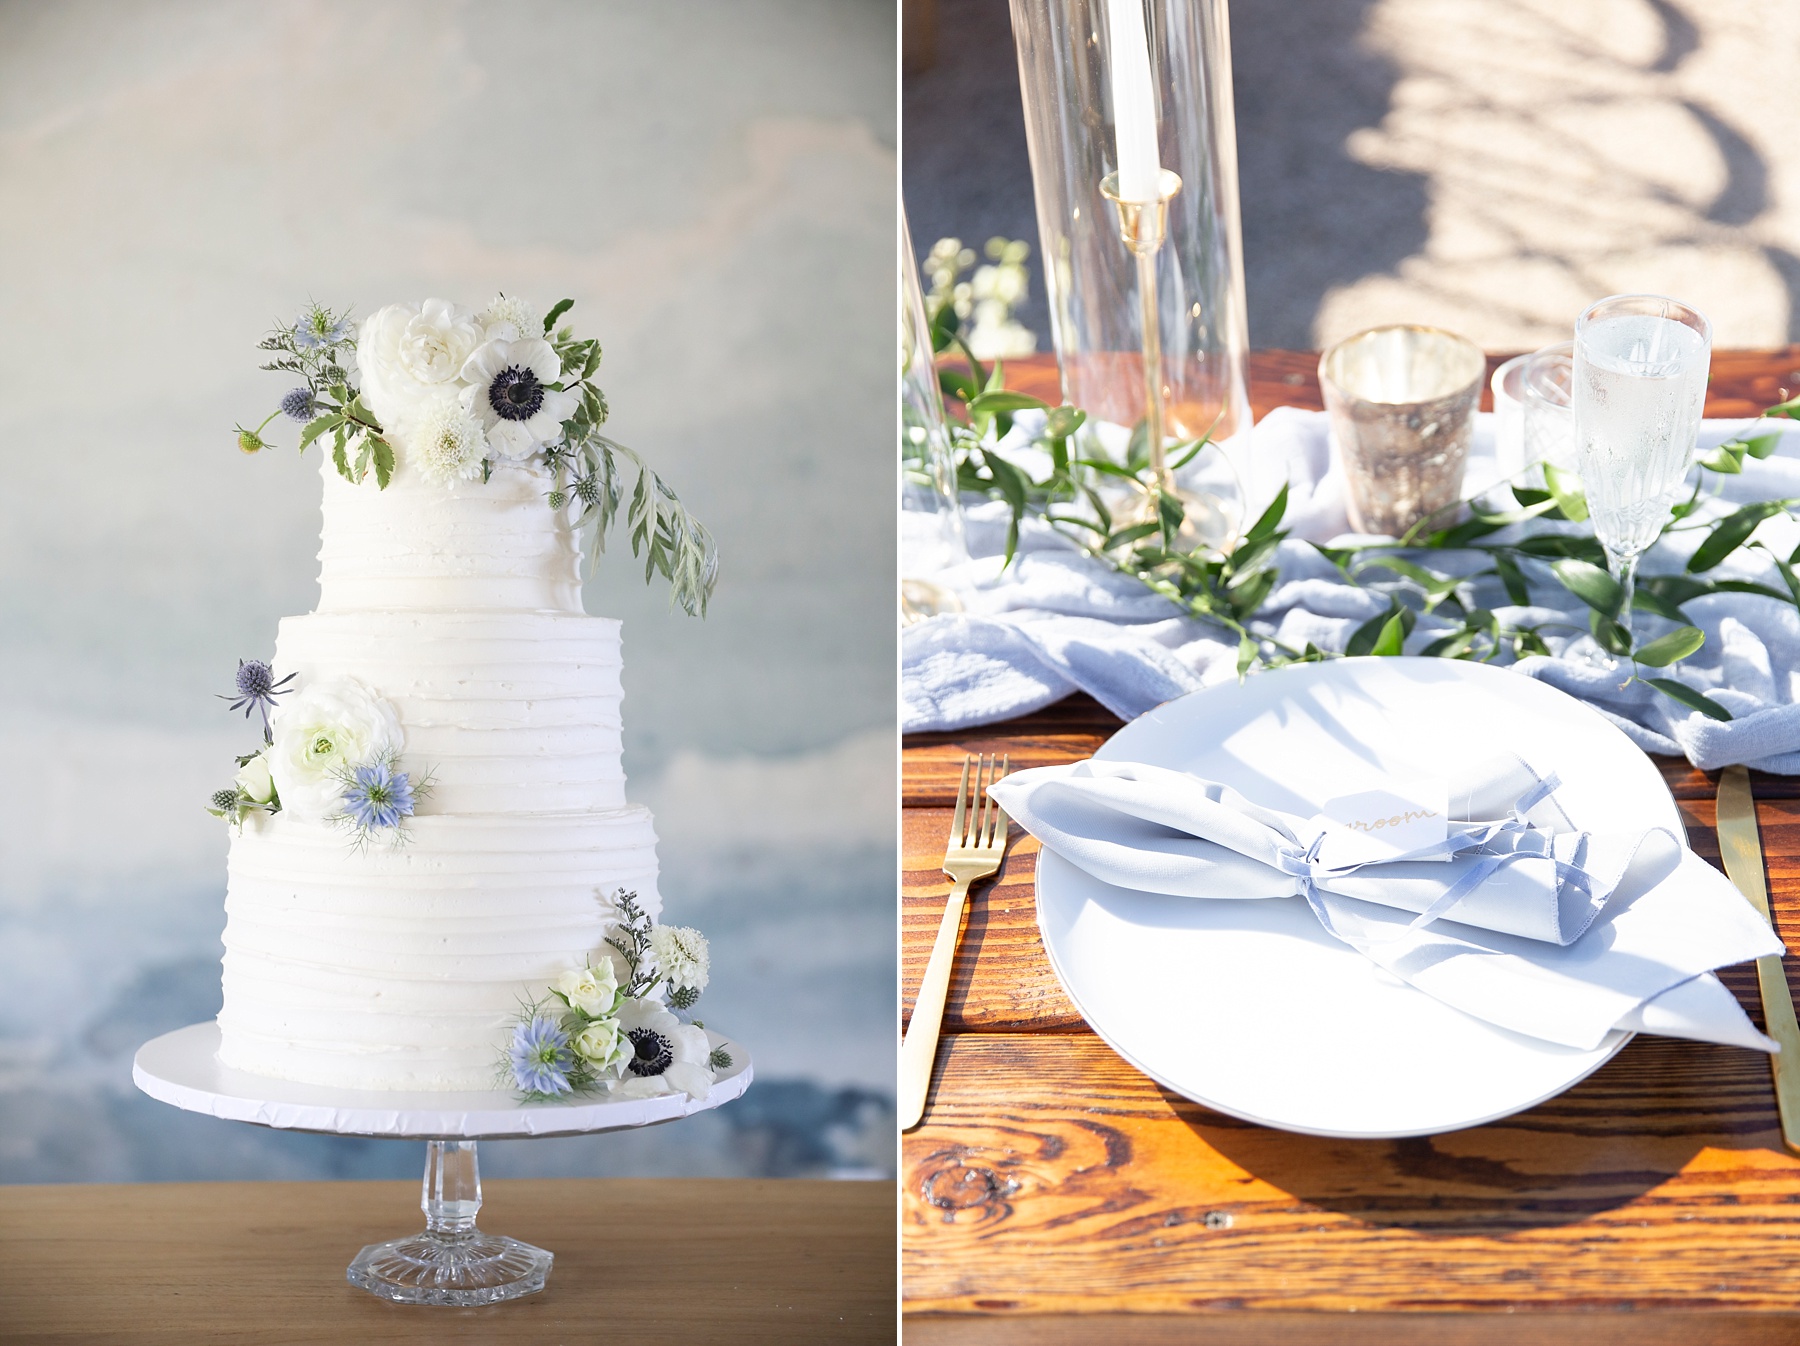 wedding cake and ivory plate with blue details for reception at Providence Plateau